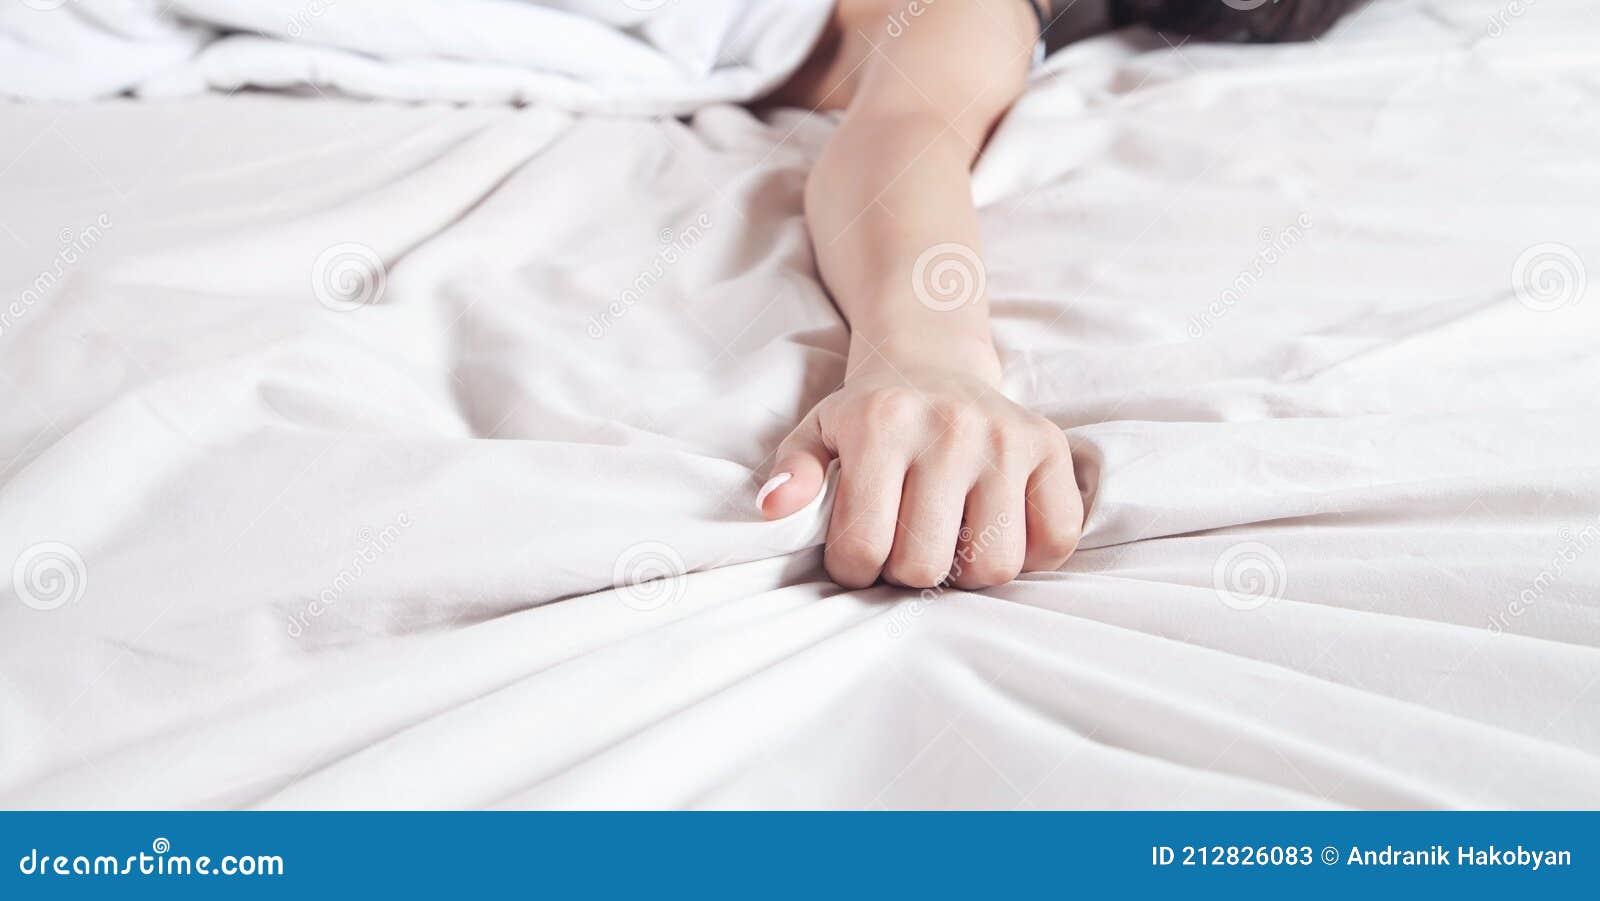 Hand of Female Pulling White Sheets